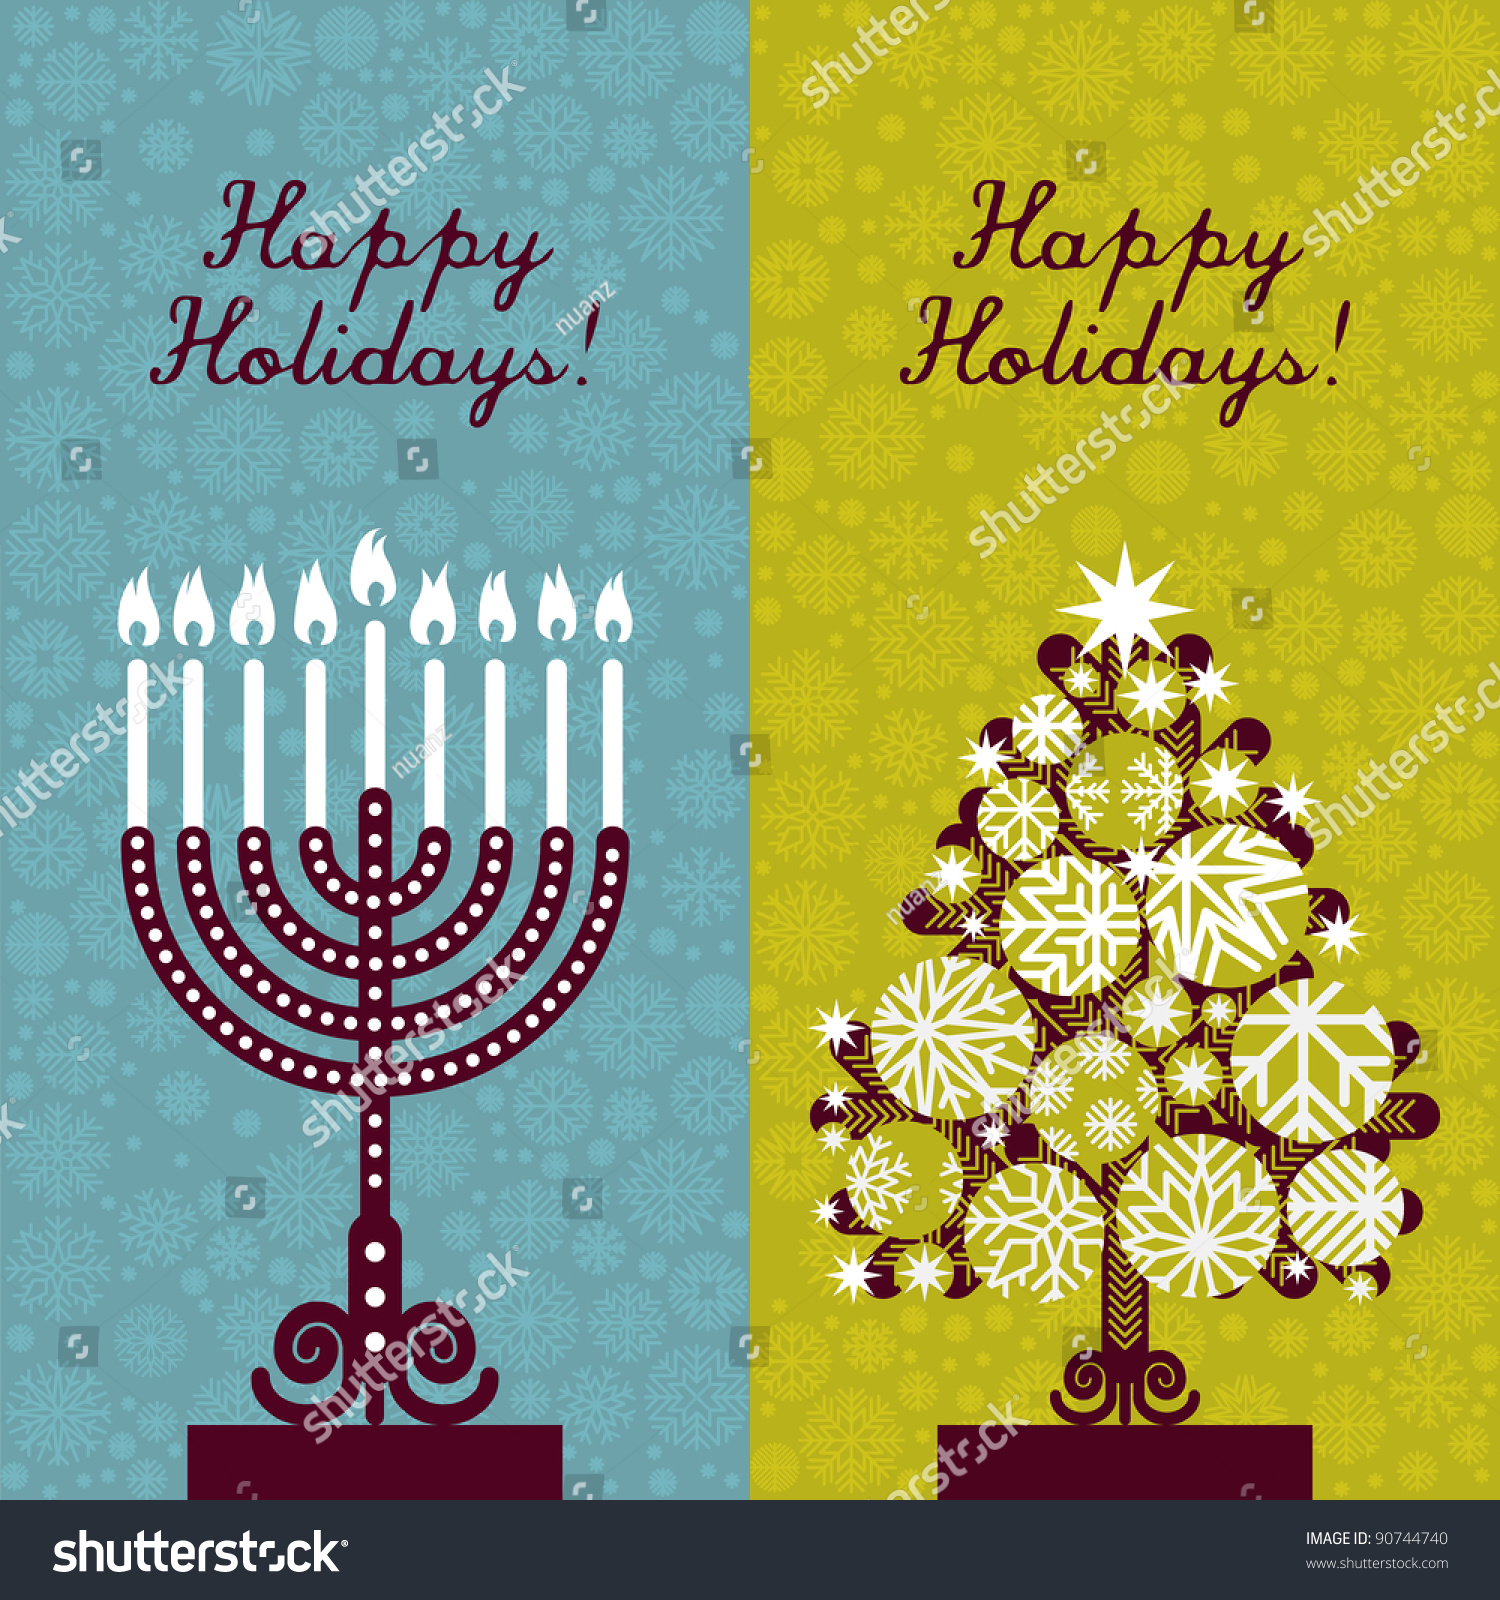 Pair of Happy Holidays cards with Christmas tree and Channuka candles